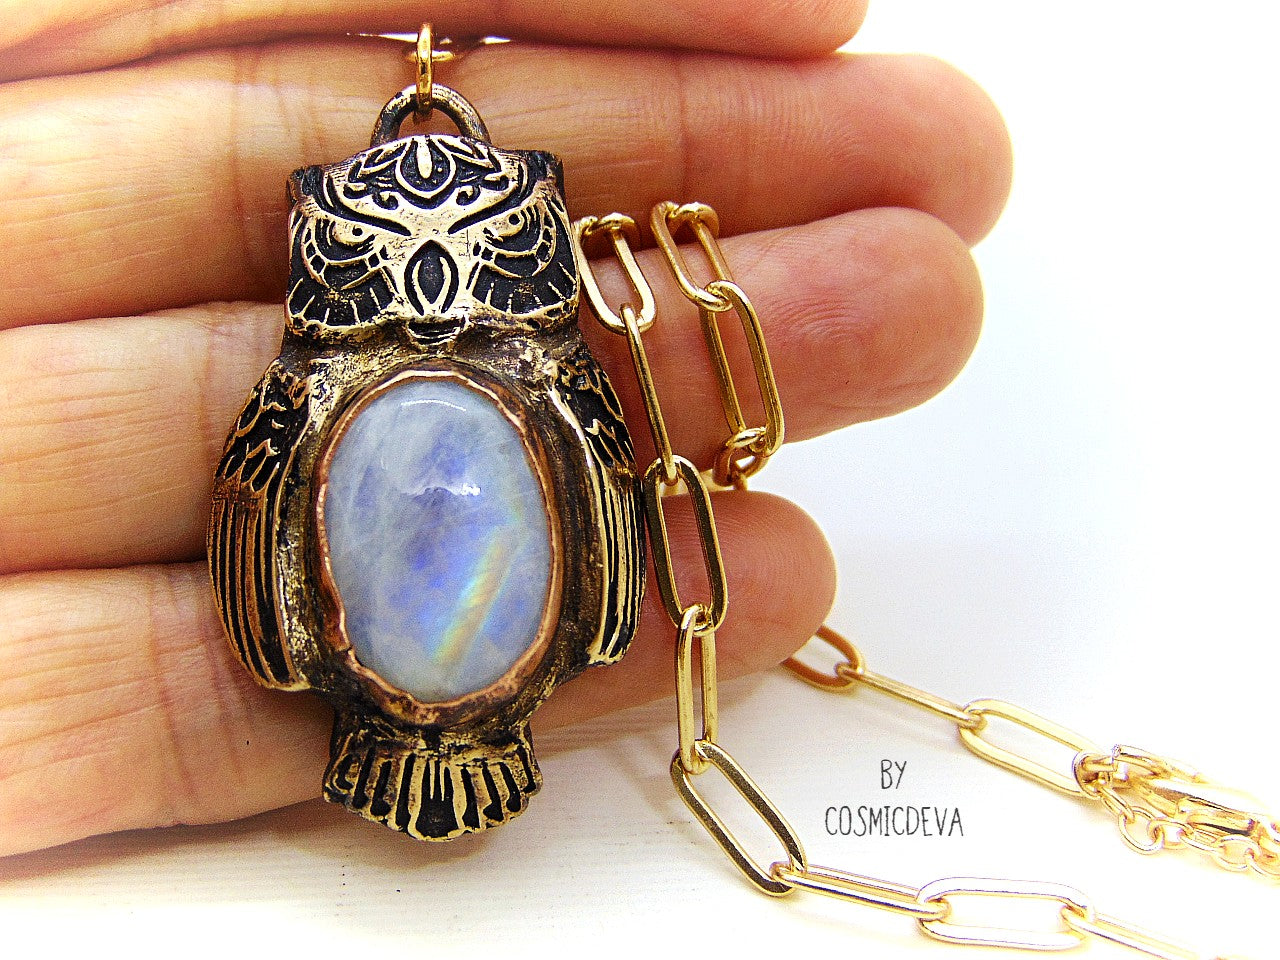 Cute one of a kind complete handcrafted and kiln fired gold bronze spirit animal owl with gorgeous rainbow moonstone bezel setting in the center. The backside of the pendant is also a owl and carries the cosmicdeva logo.